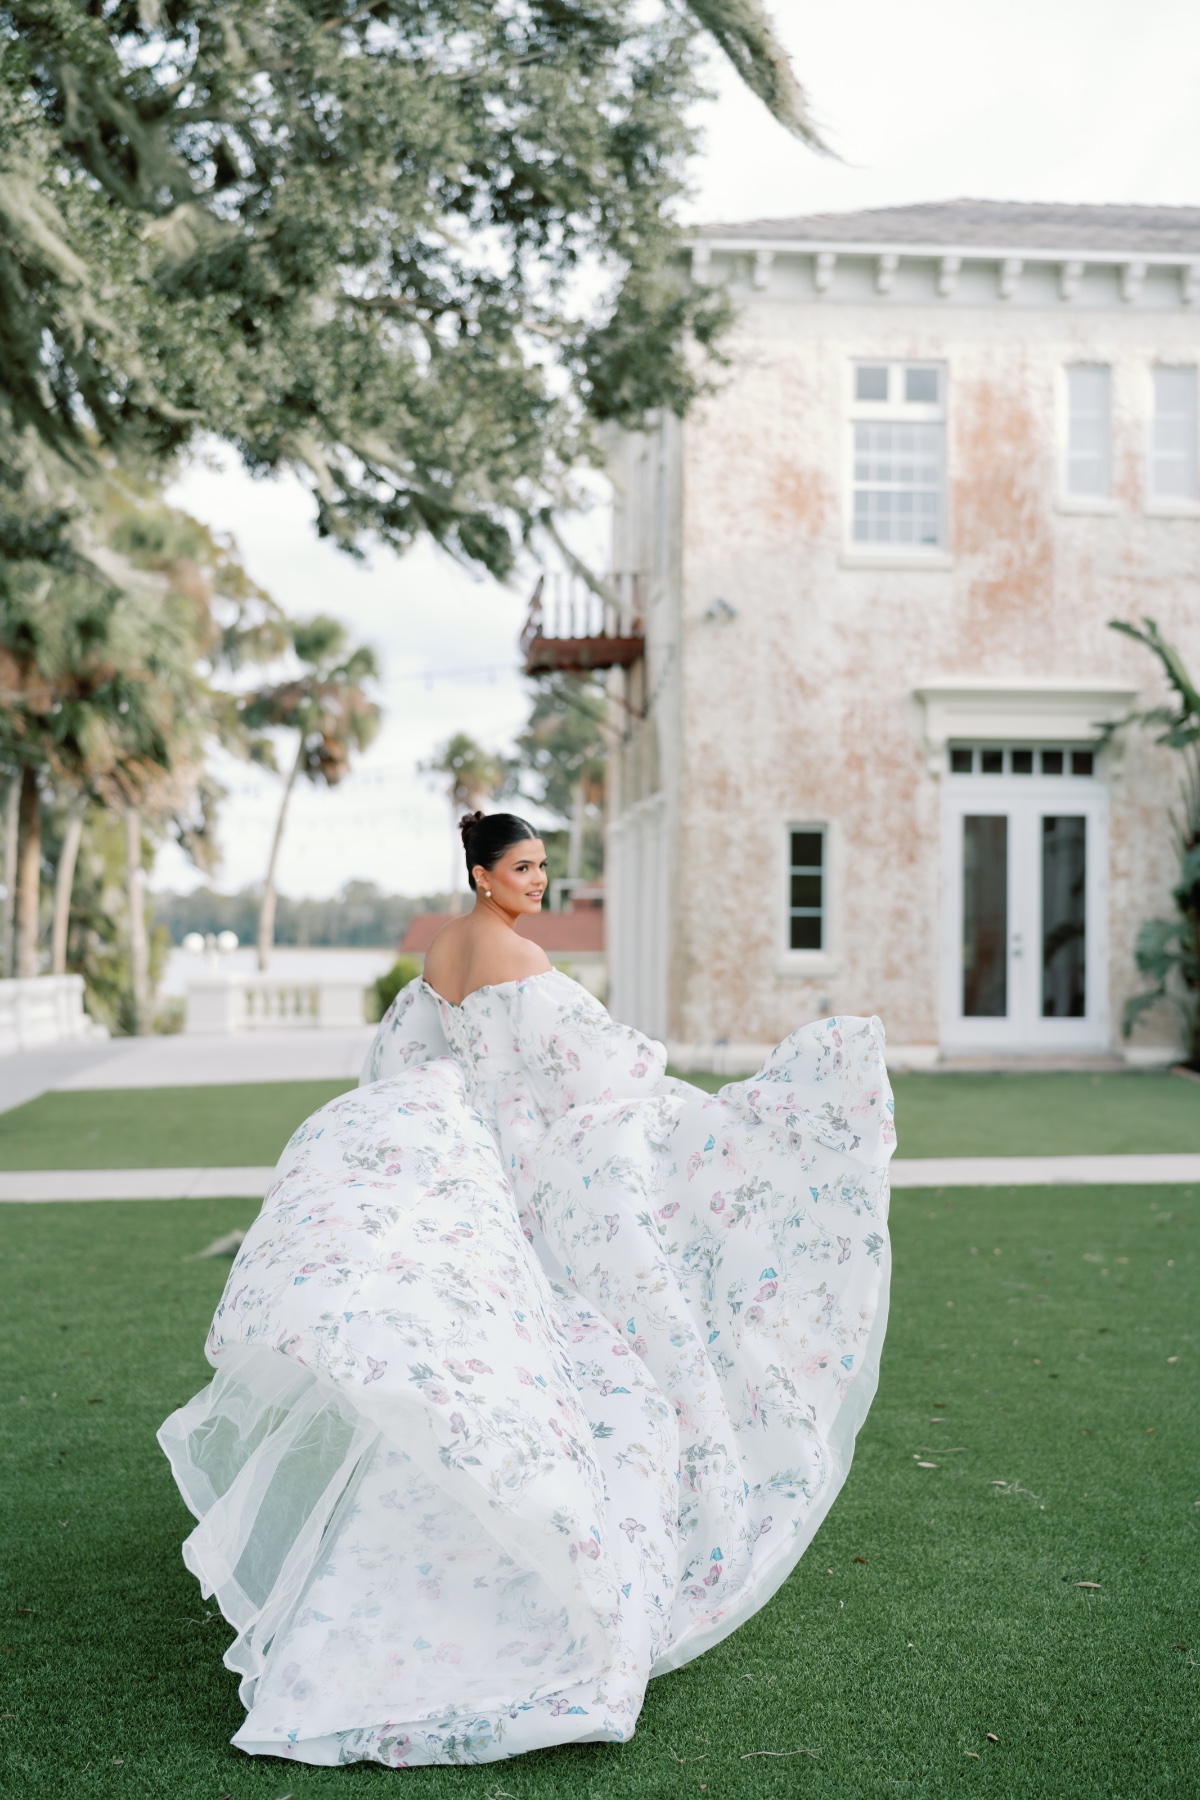 floral patterned wedding ballgown